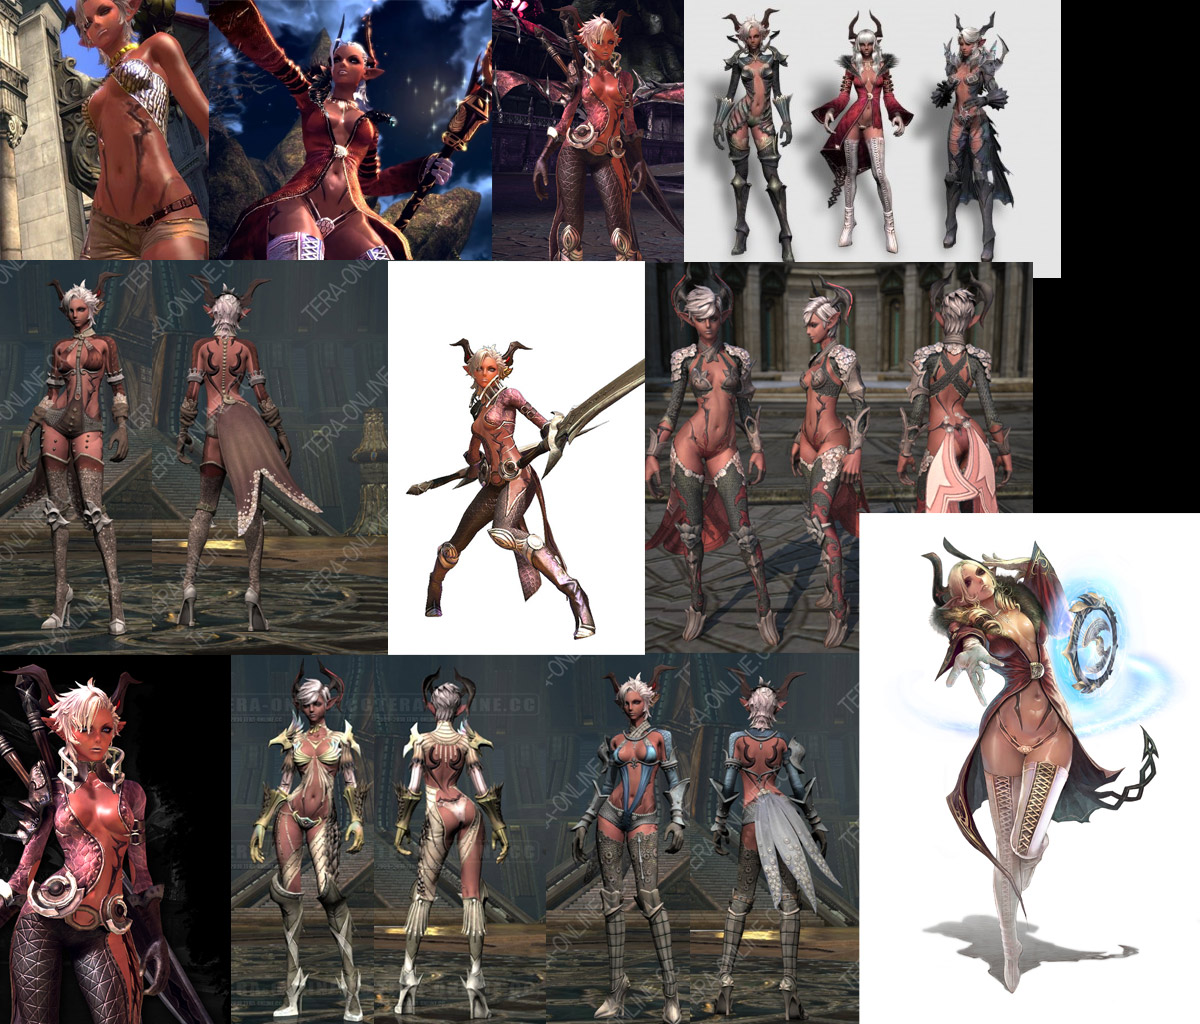 Best of Tera online nude patch